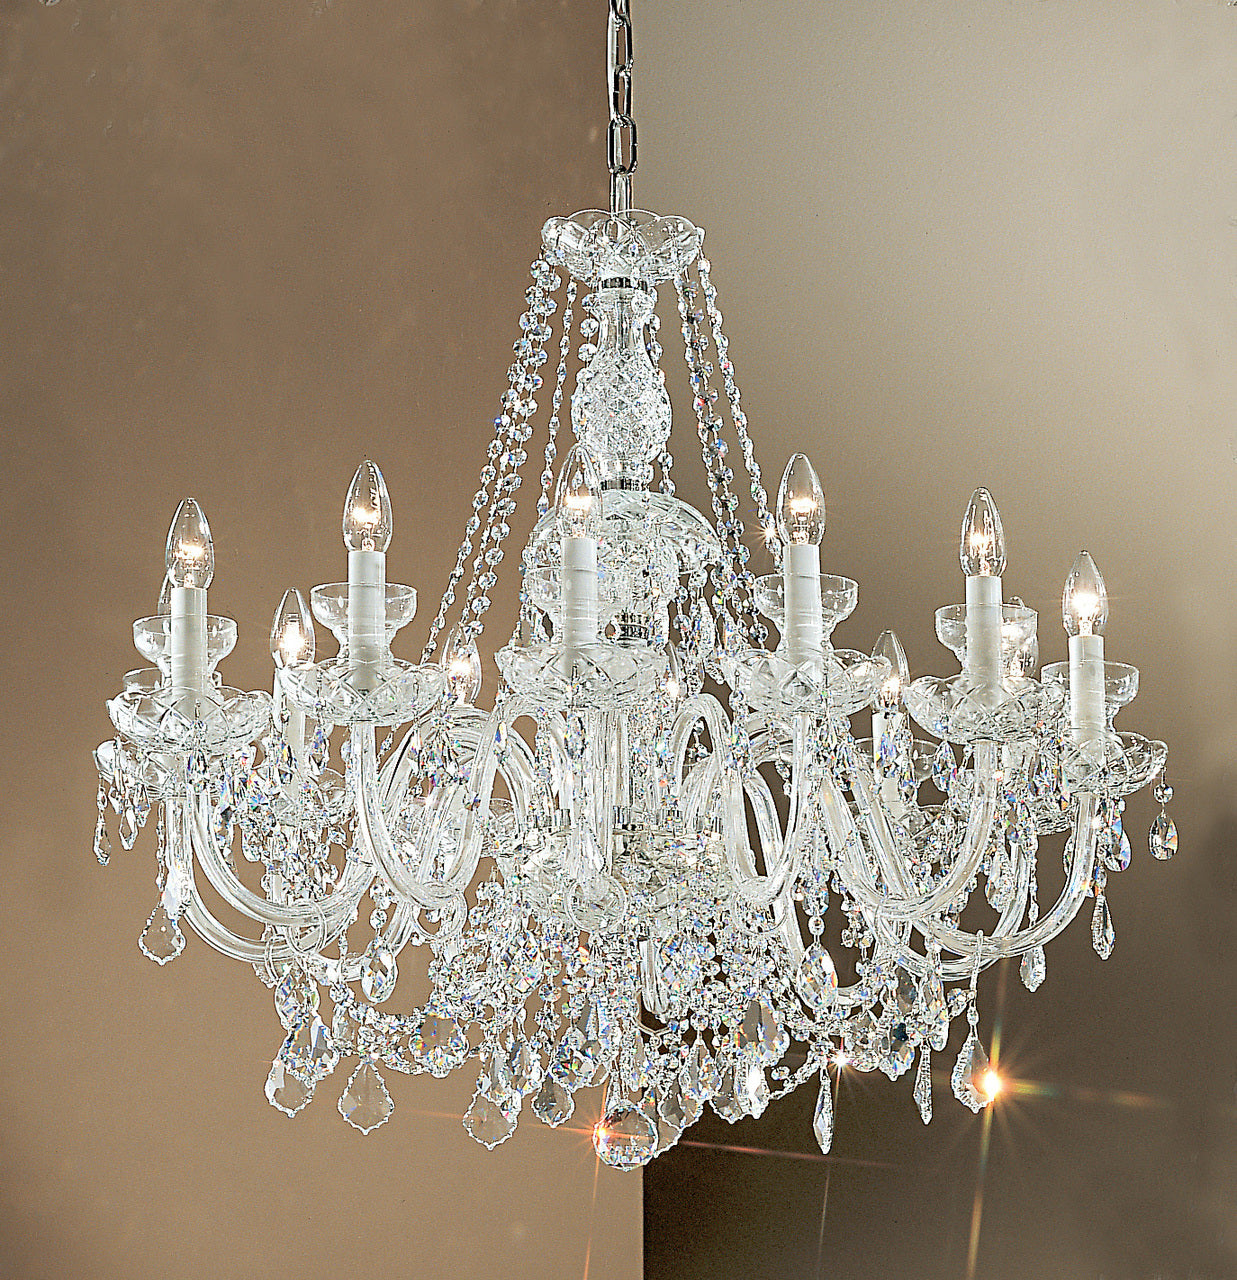 Classic Lighting 8276 G C Bohemia Crystal/Glass Chandelier in 24k Gold (Imported from Italy)